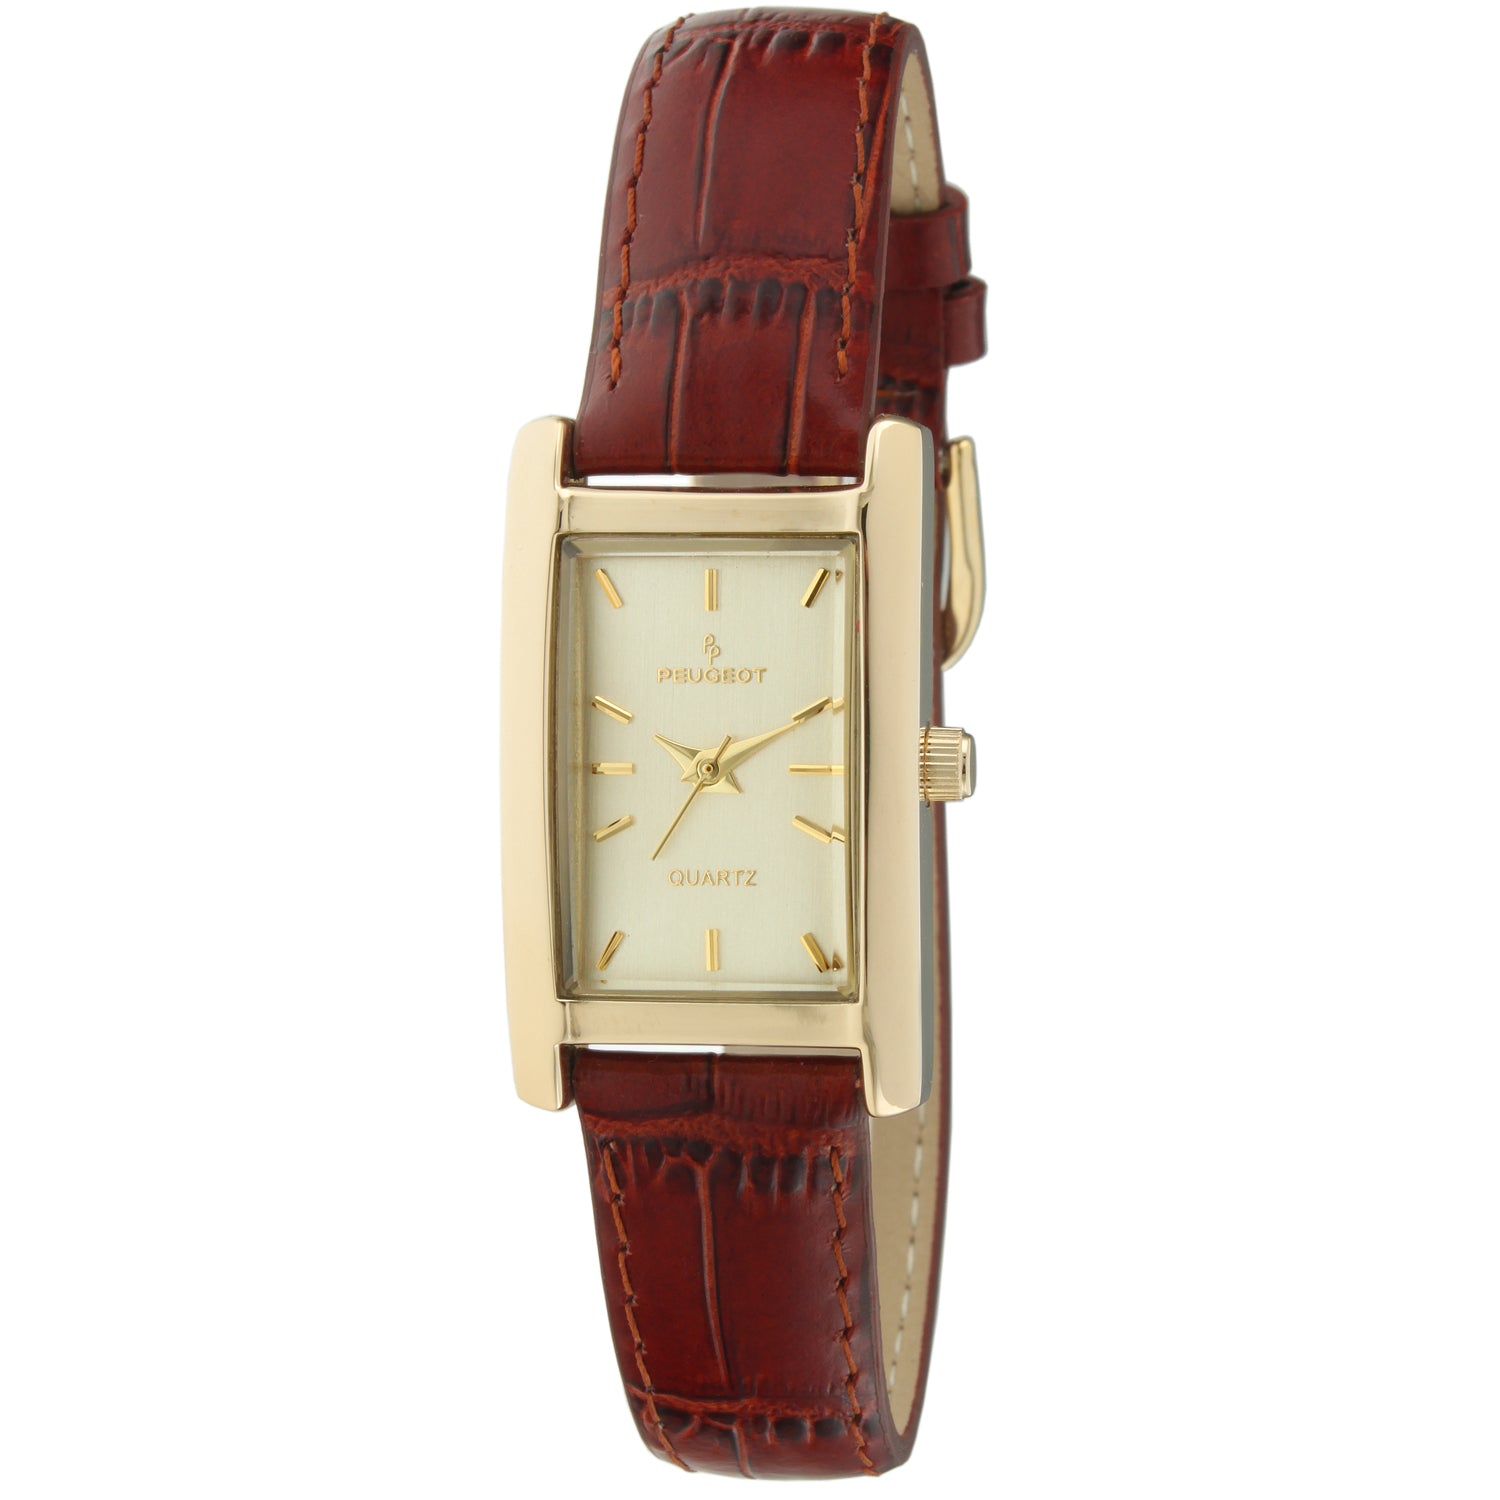 Peugeot Women's Small Dress Watch Brown Leather Strap - Peugeot